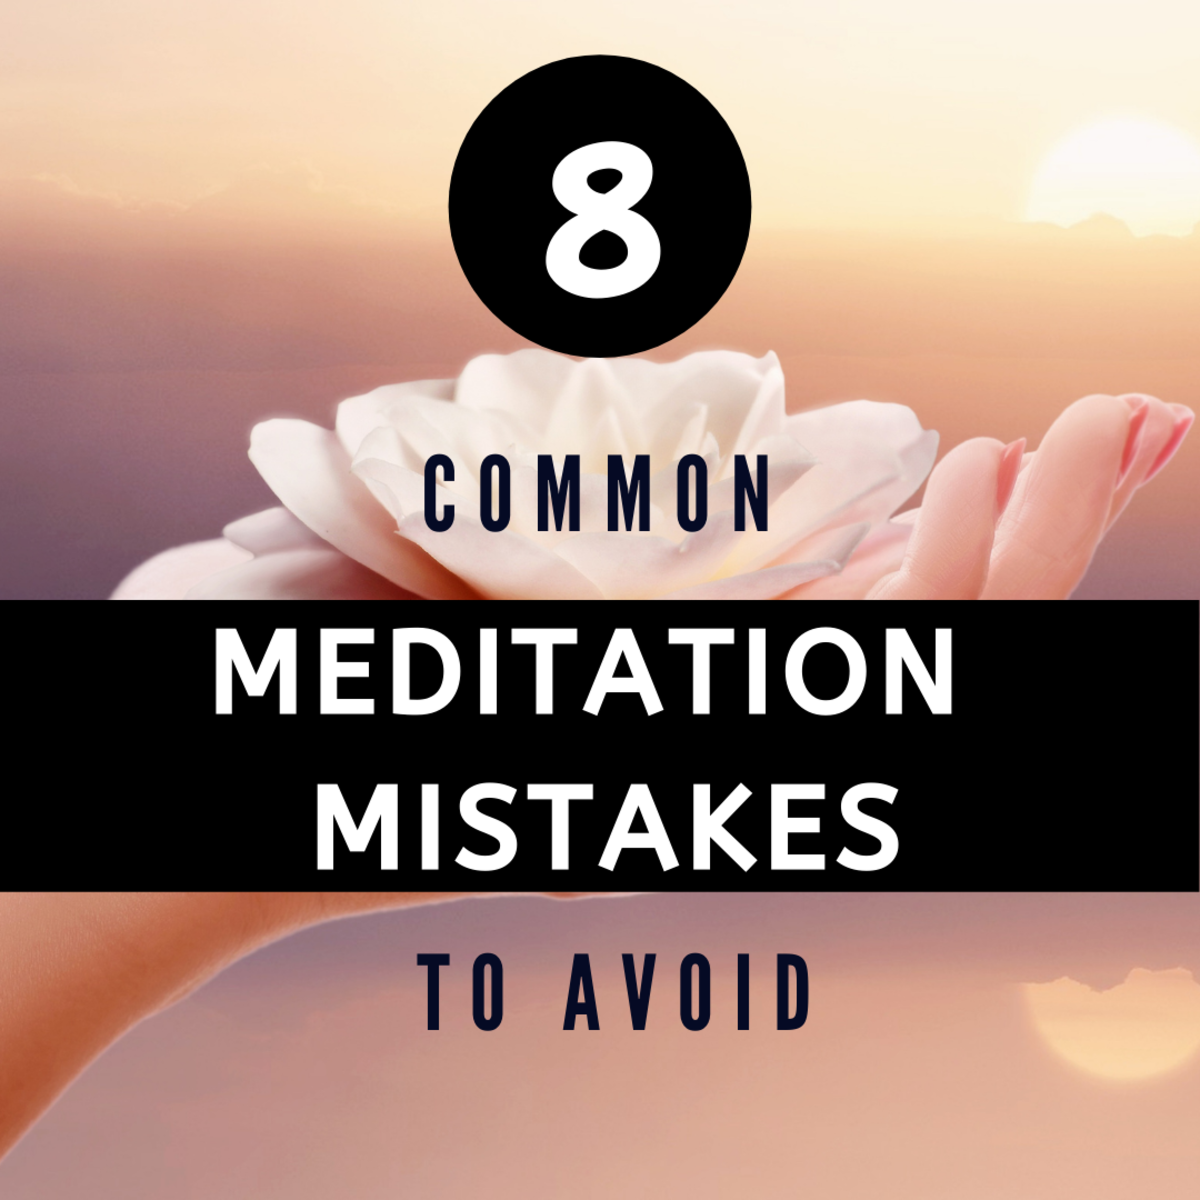 8 Common Meditation Mistakes to Avoid in Your Practice